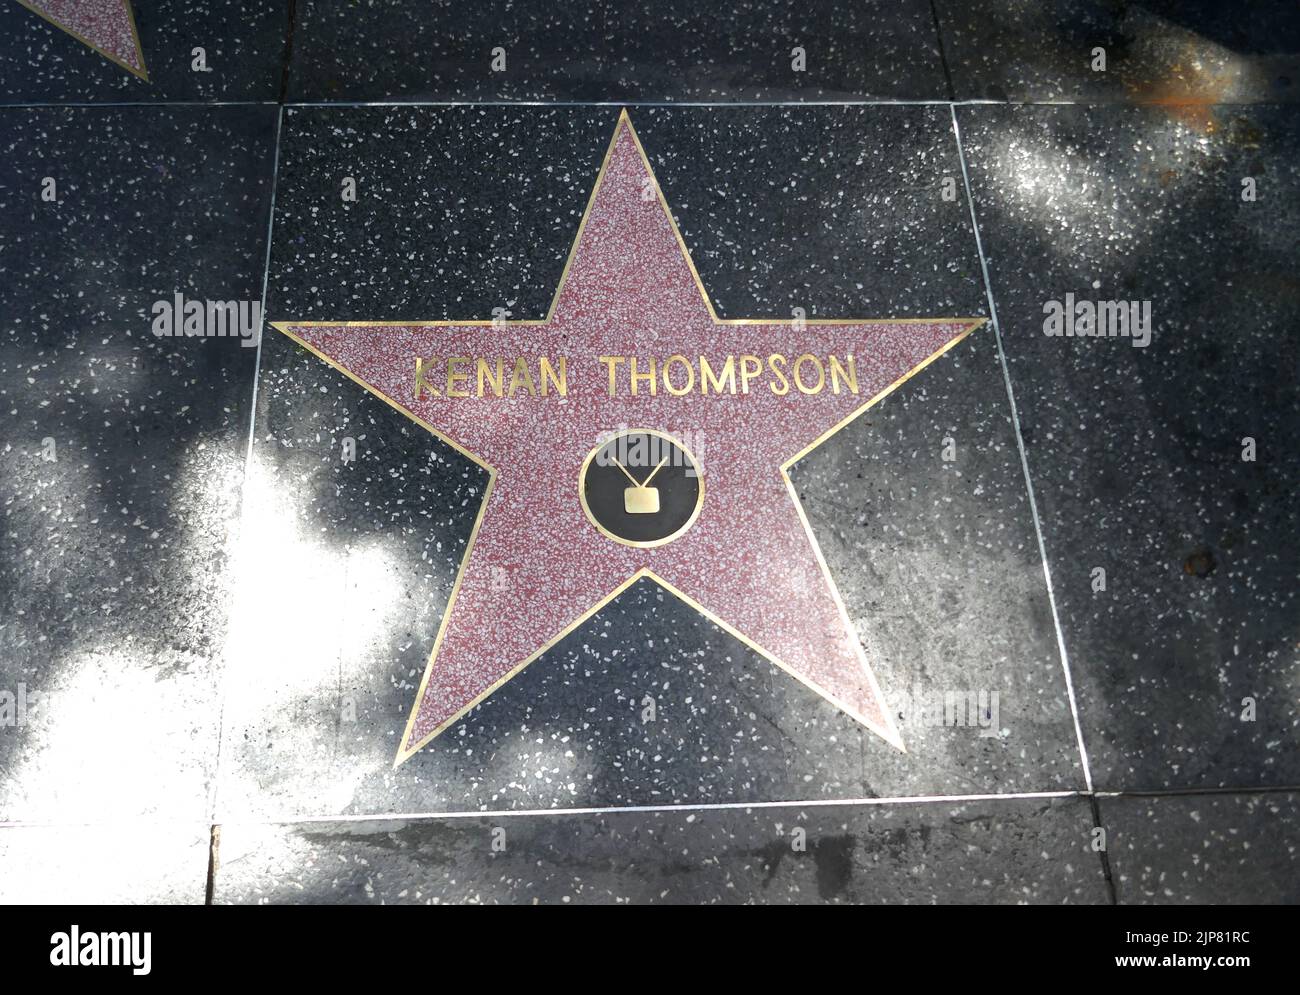 Los Angeles, California, USA 15th August 2022 Actor Kenan Thompson's Hollywood Walk of Fame Star on August 15, 2022 in Los Angeles, California, USA. Photo by Barry King/Alamy Stock Photo Stock Photo